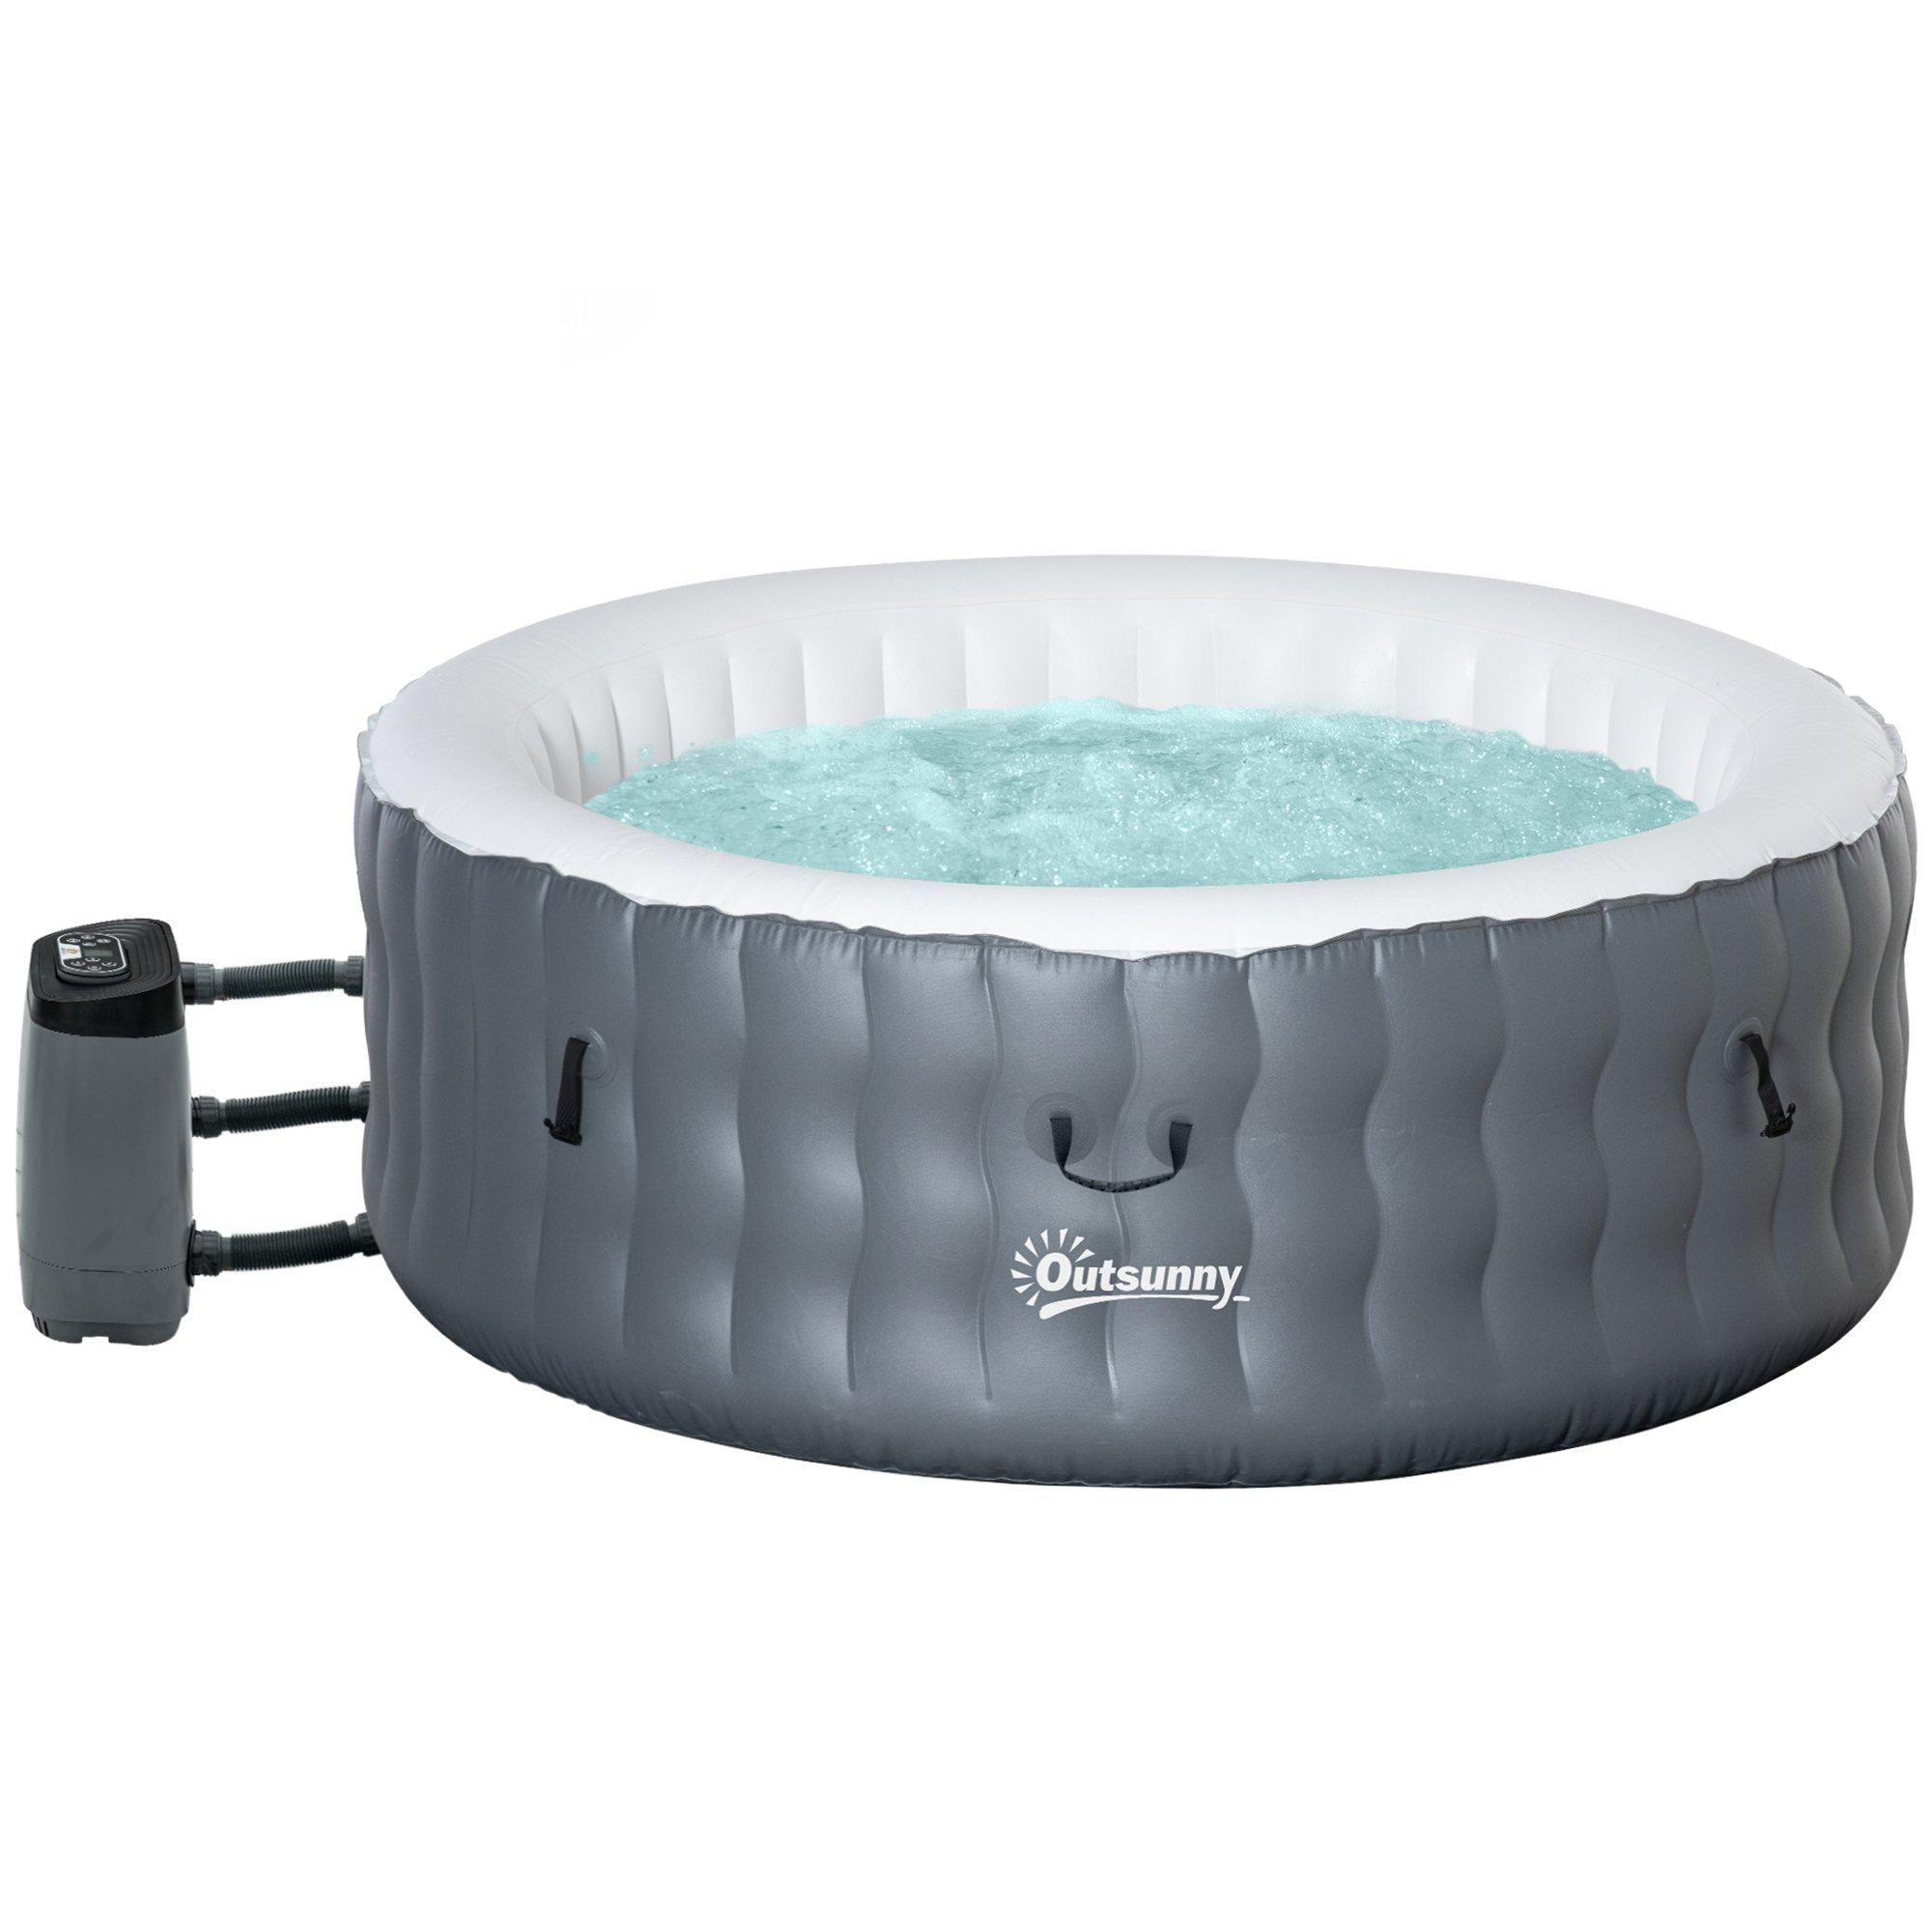 Round Inflatable Hot Tub Bubble Spa with Pump, Cover,4 Person